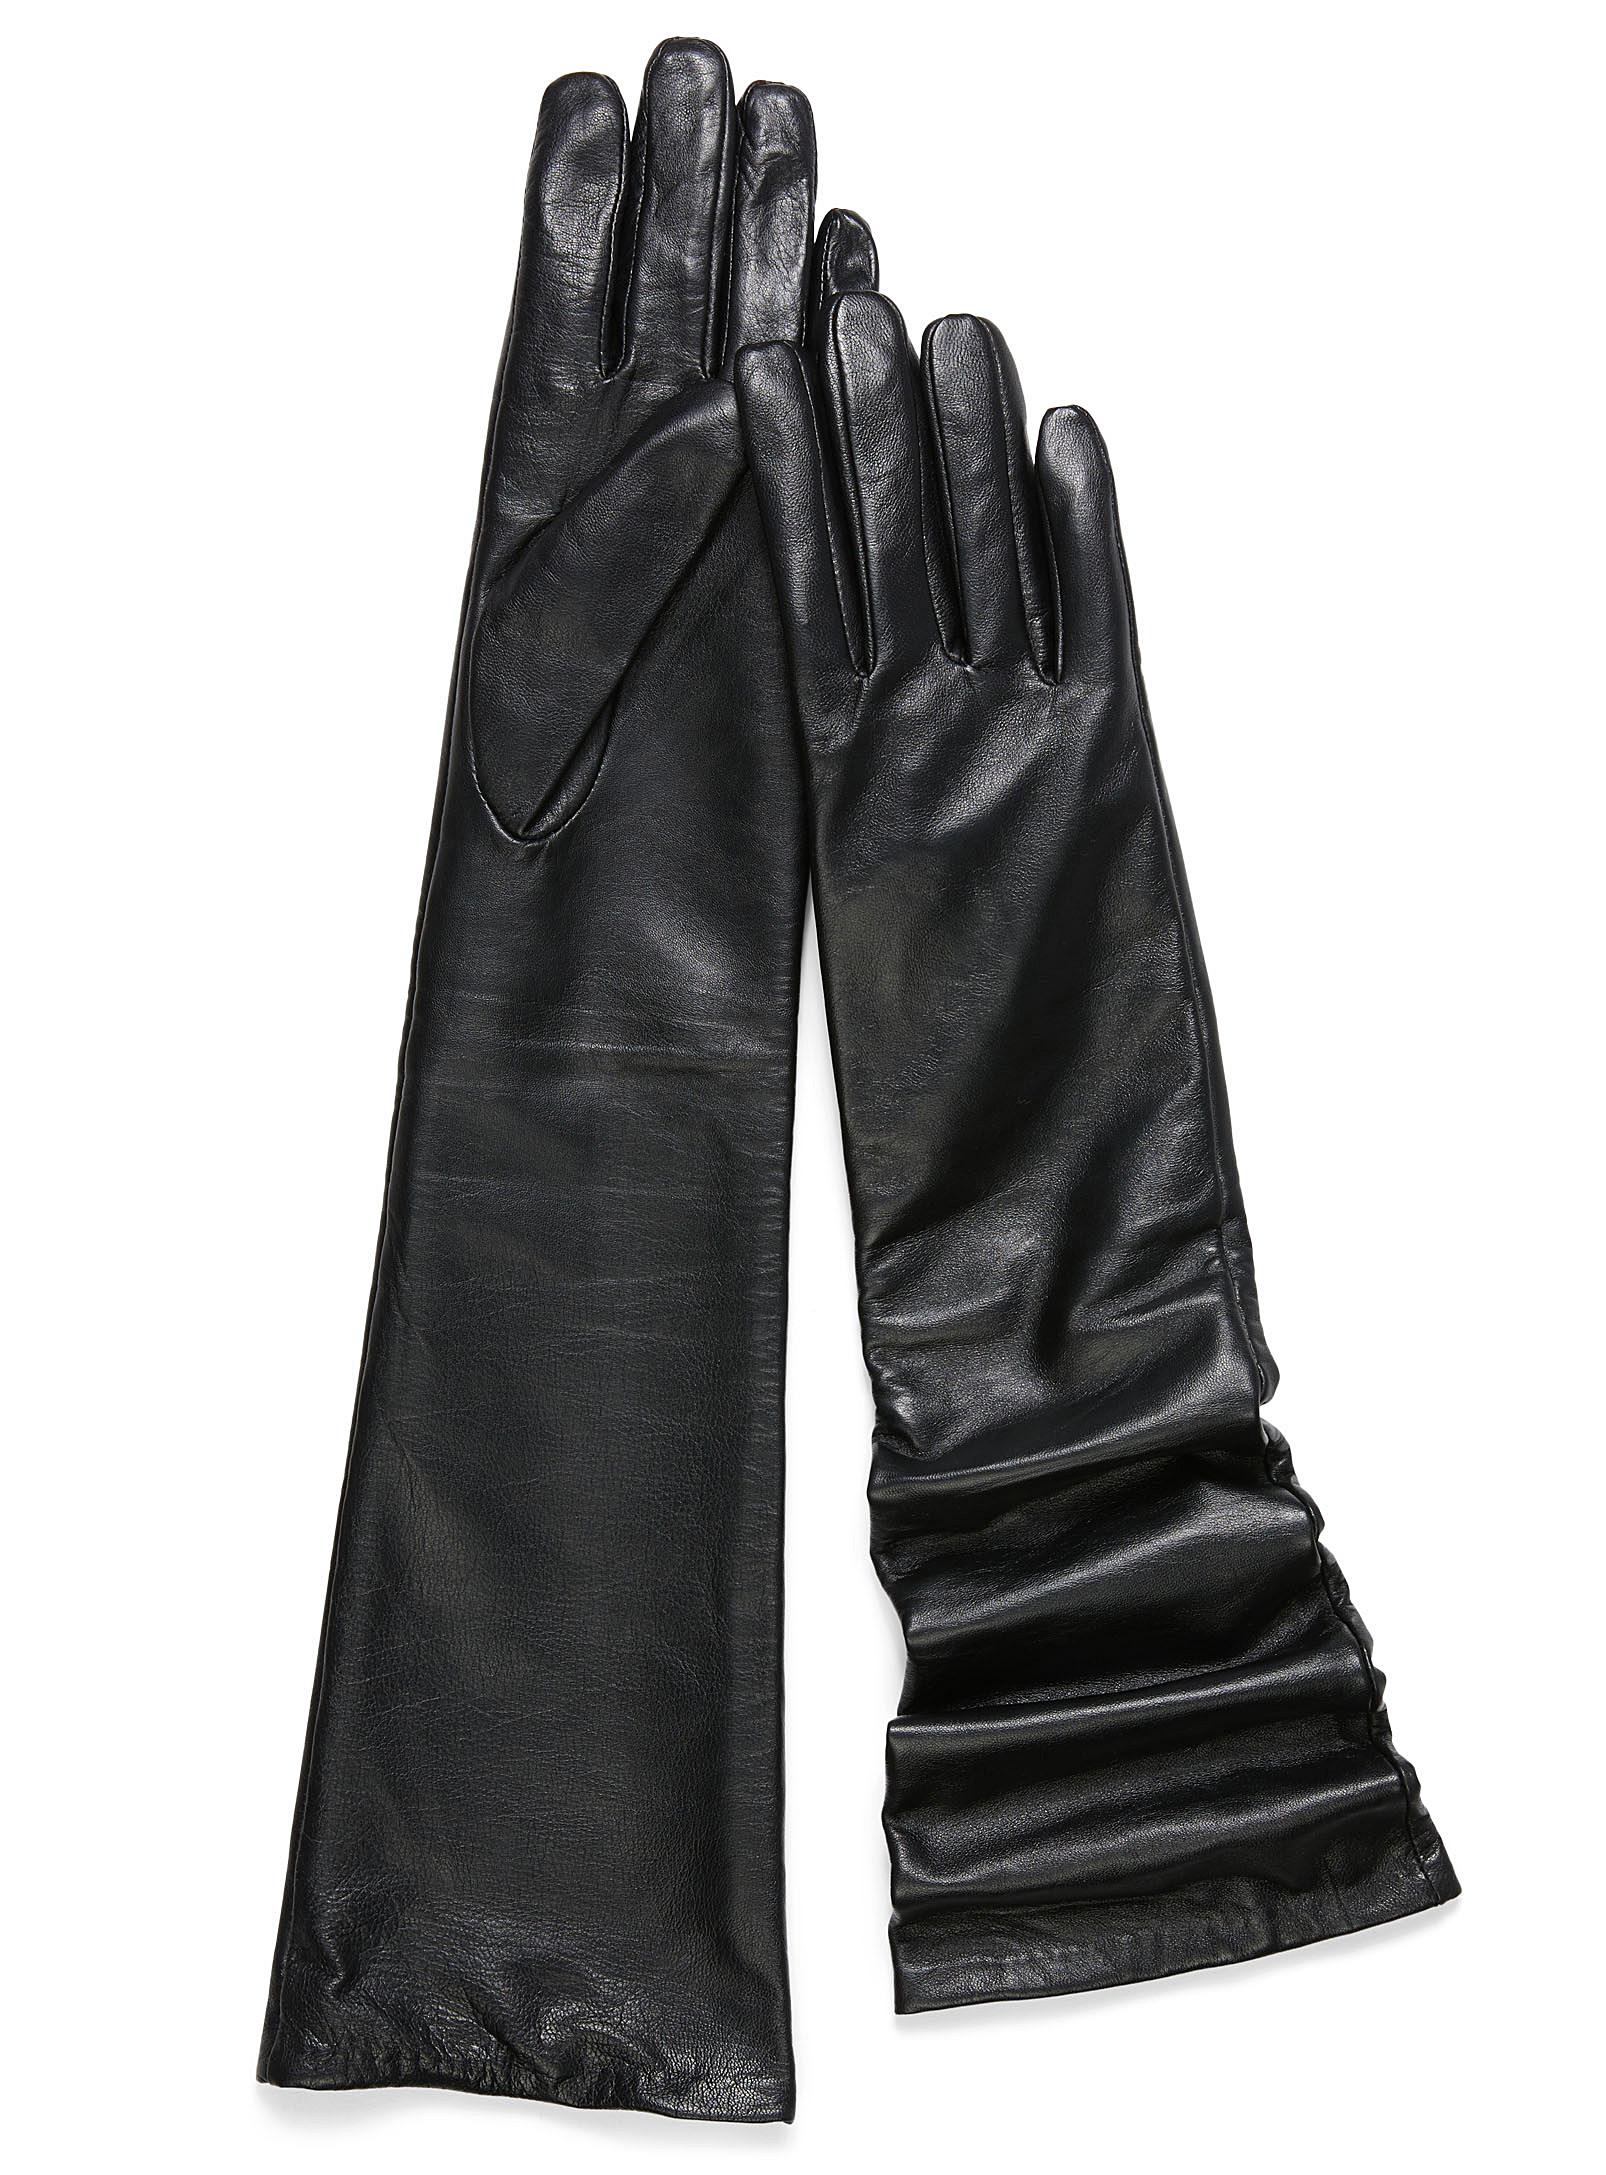 Simons - Women's Smooth long leather gloves